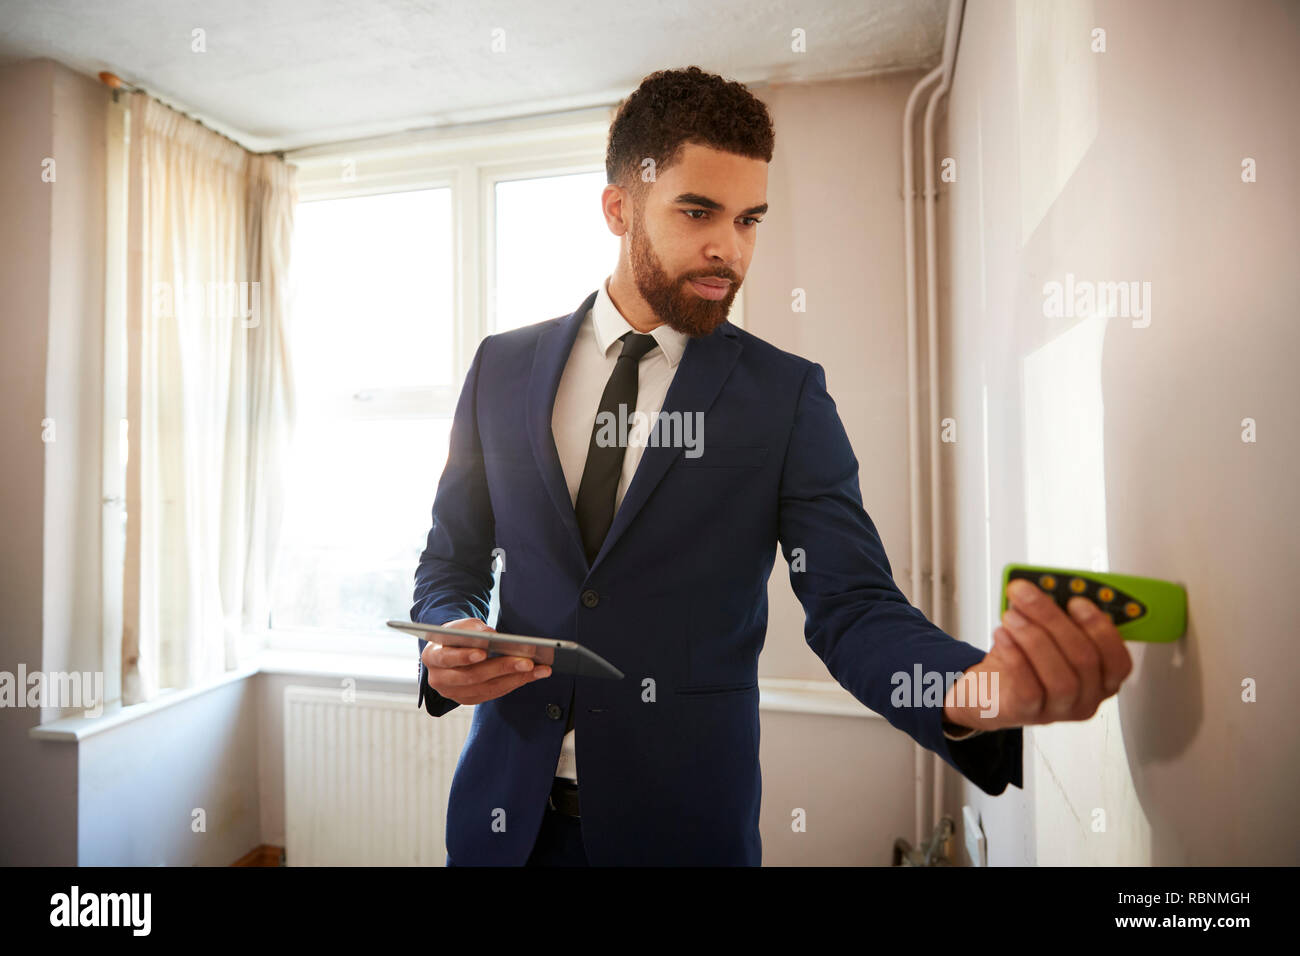 Male Realtor With Digital Tablet Measuring Room With Laser Measure Stock Photo